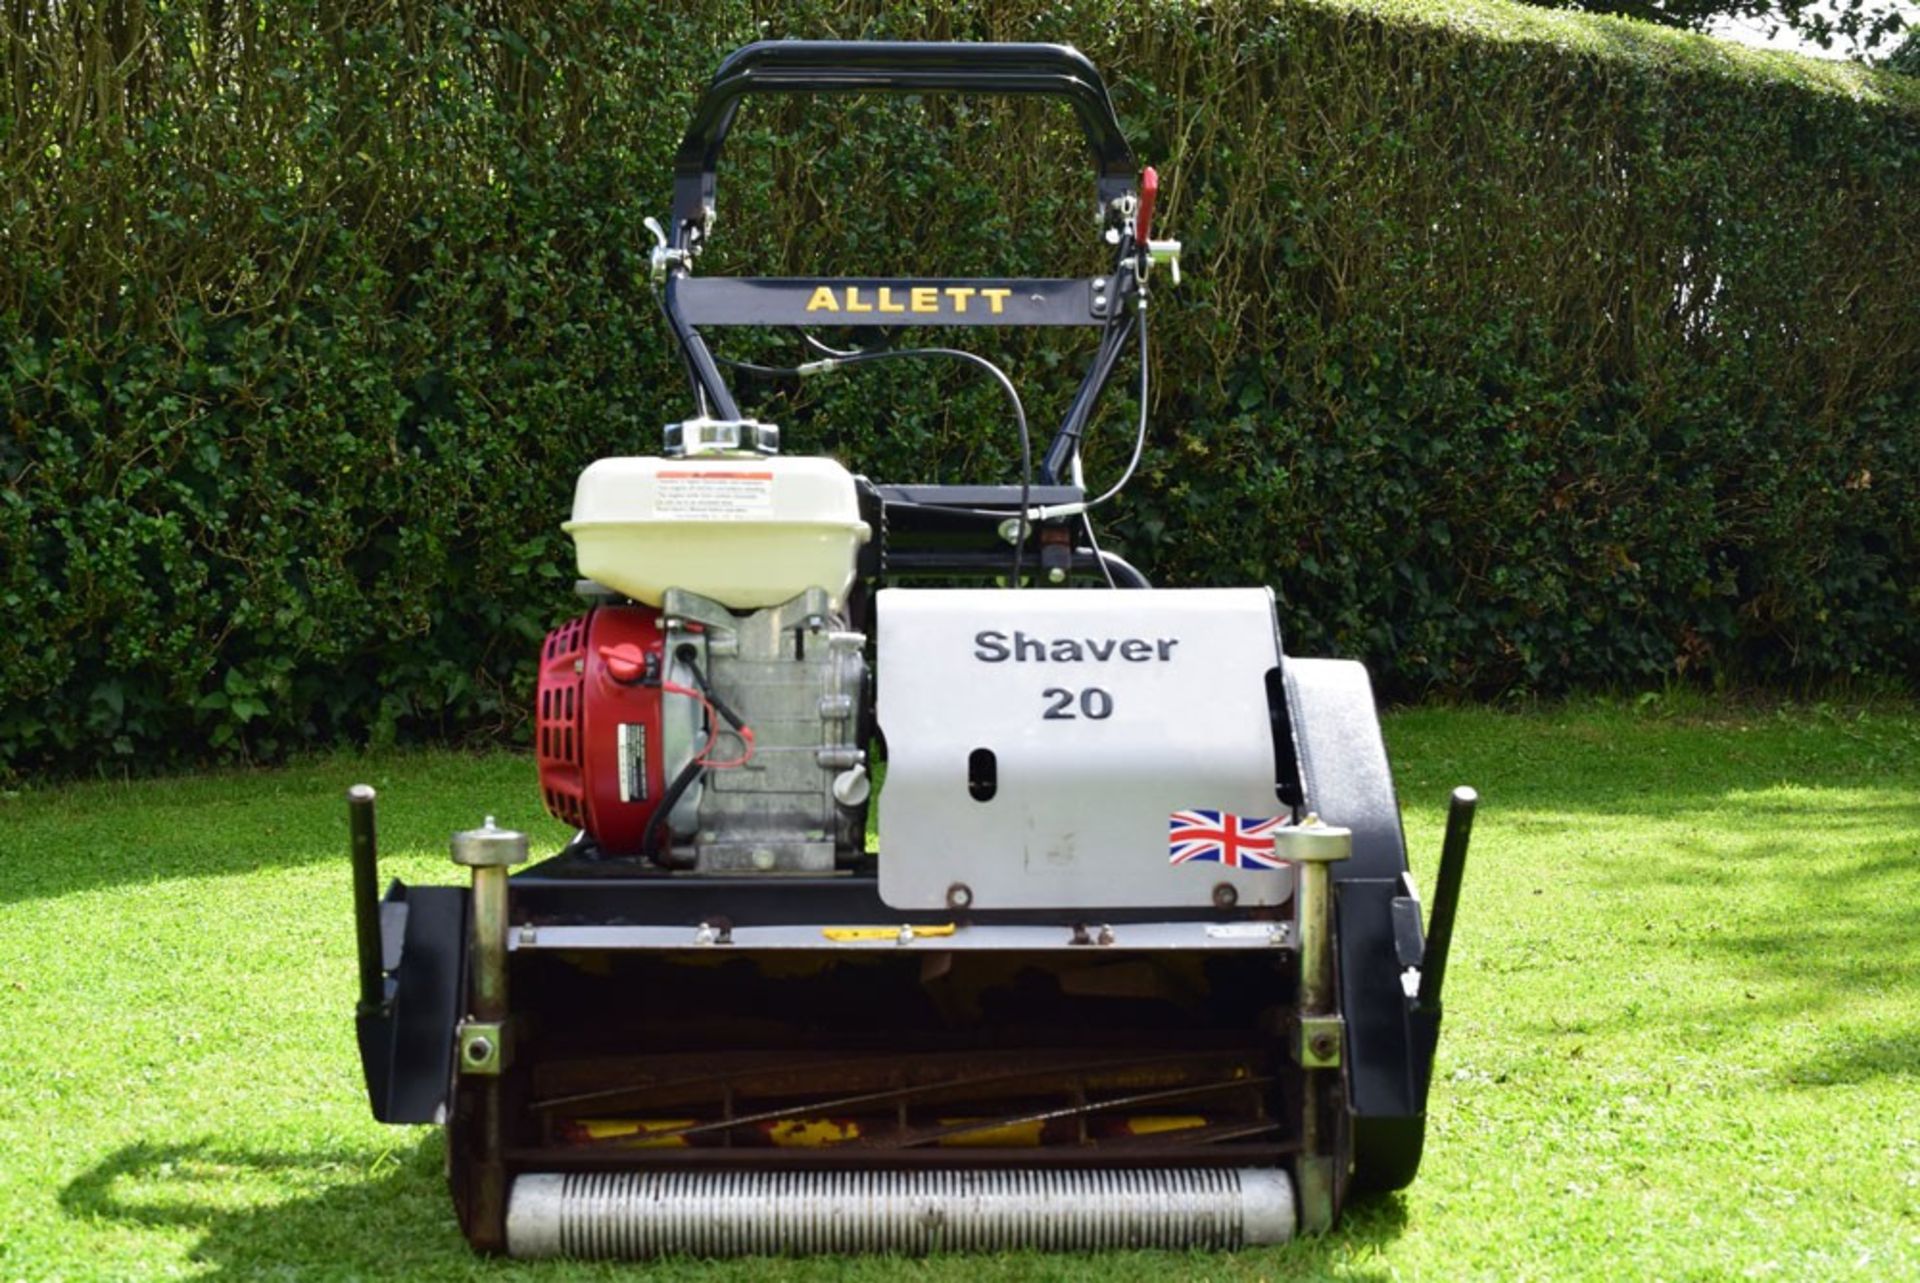 2012 Allett Shaver 20, 10 Blade Cylinder Mower With Grass Box - Image 3 of 9